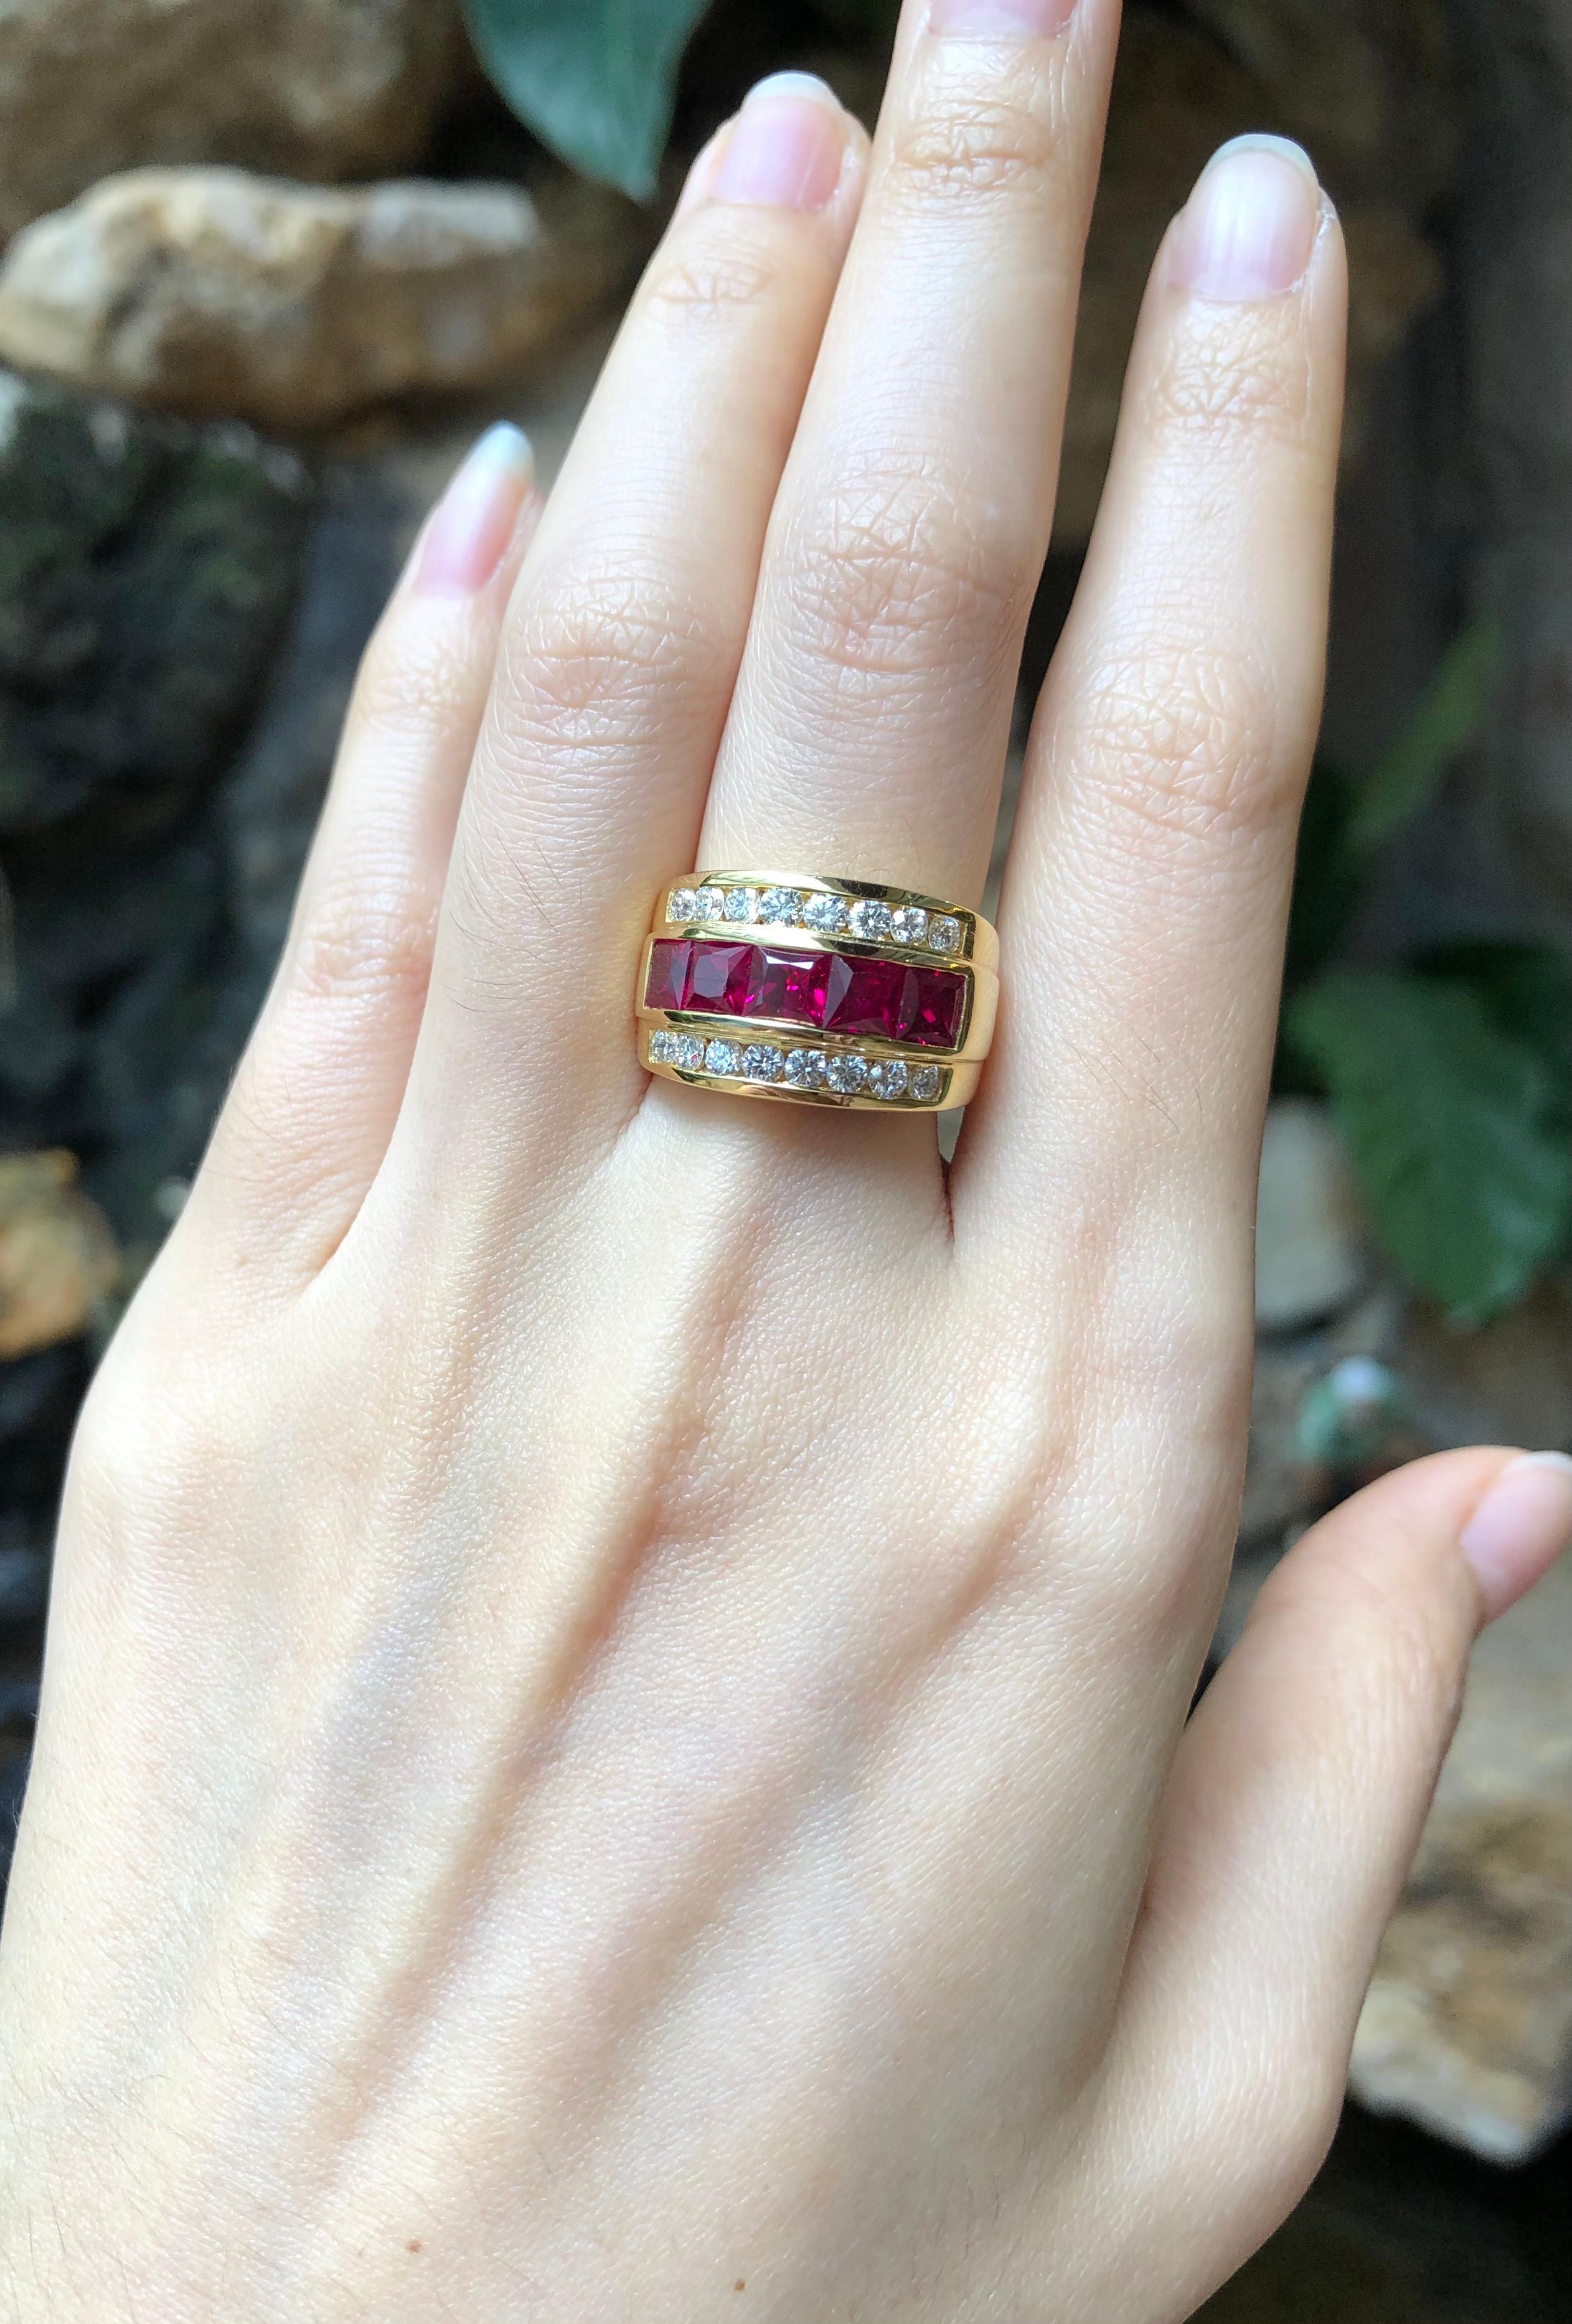 Ruby 2.48 carats with Diamond 0.82 carat Ring set in 18 Karat Gold Settings

Width:  2.0 cm 
Length: 1.2 cm
Ring Size: 51
Total Weight: 12.65 grams

